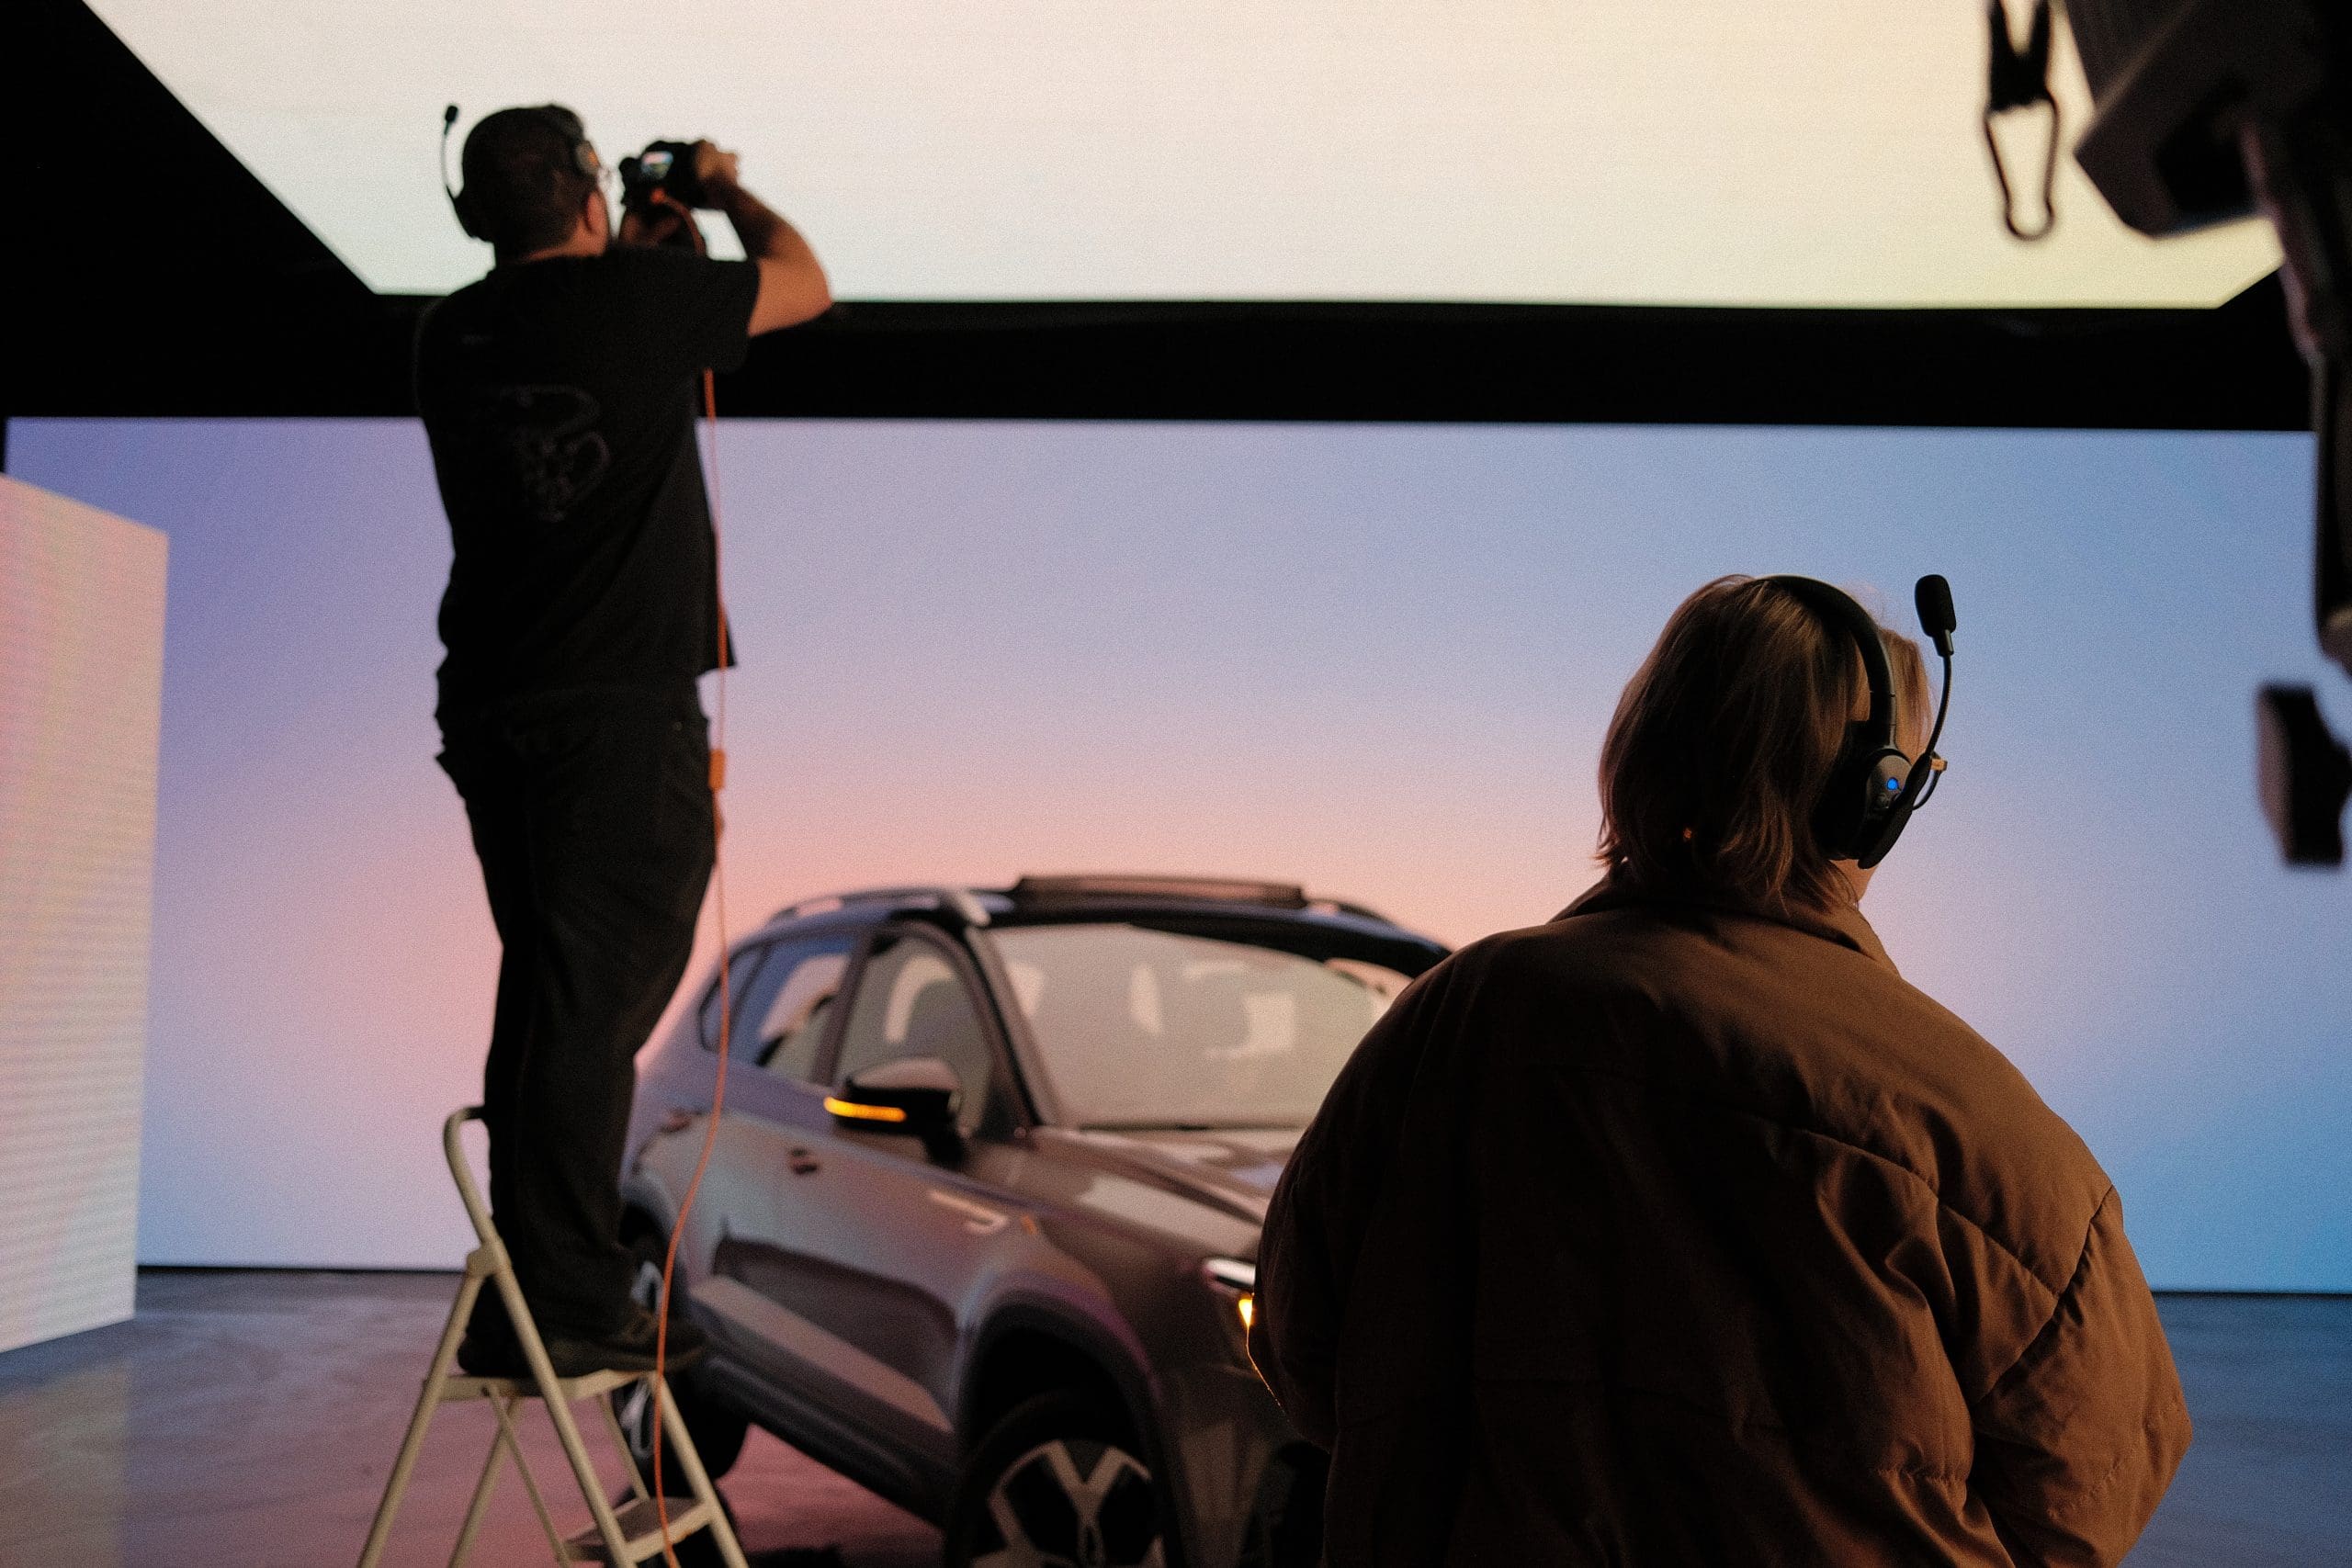 A man is taking a picture of a car in a studio.